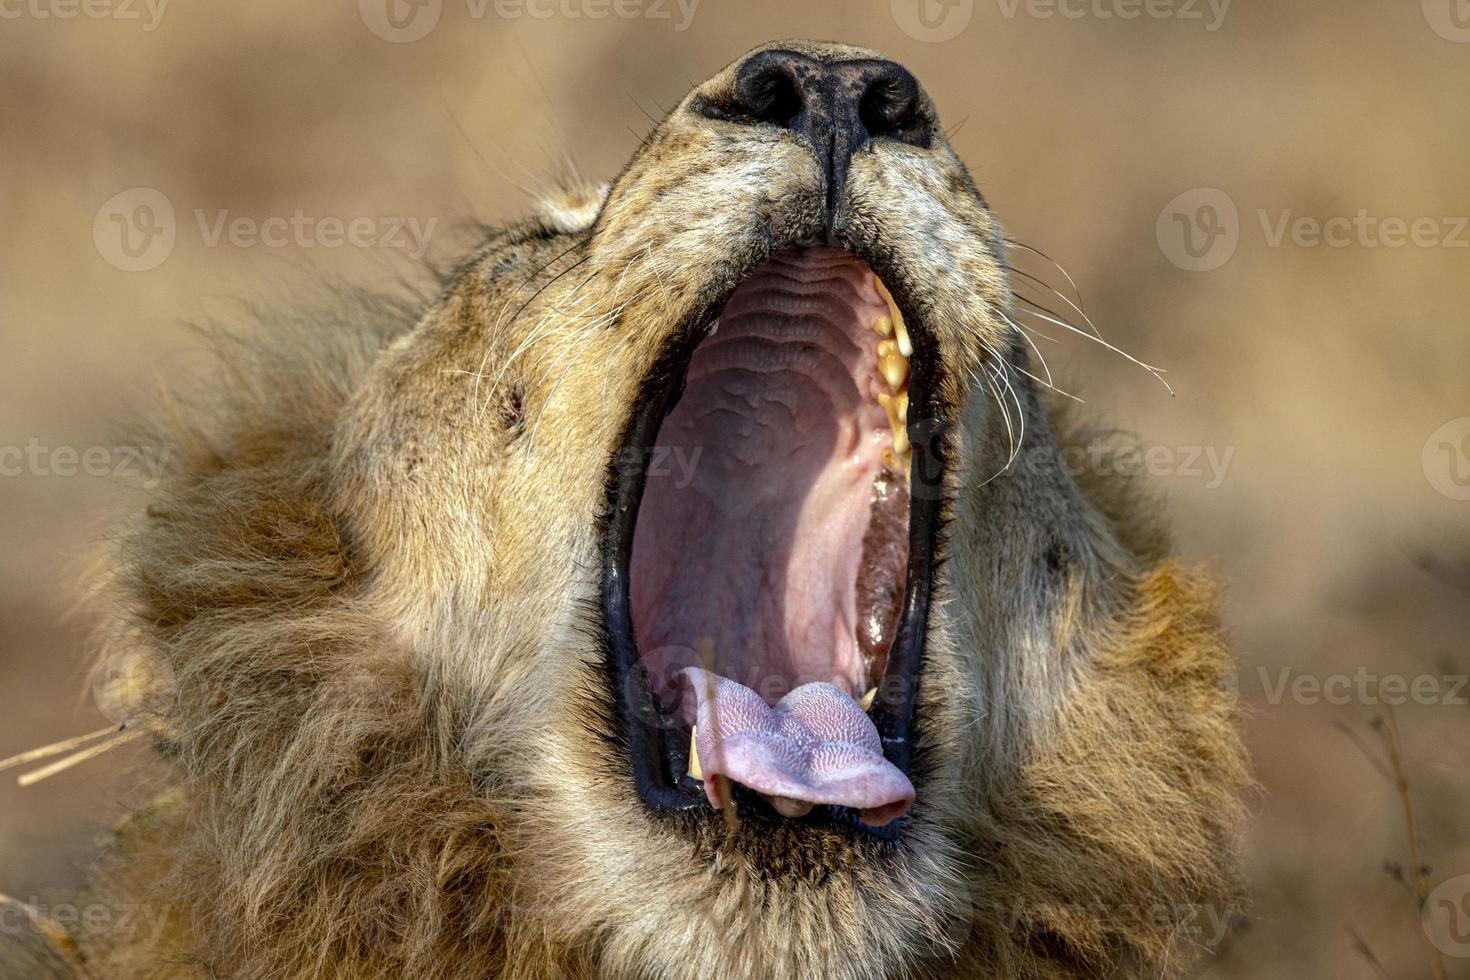 roaring male lion in kruger park south africa photo